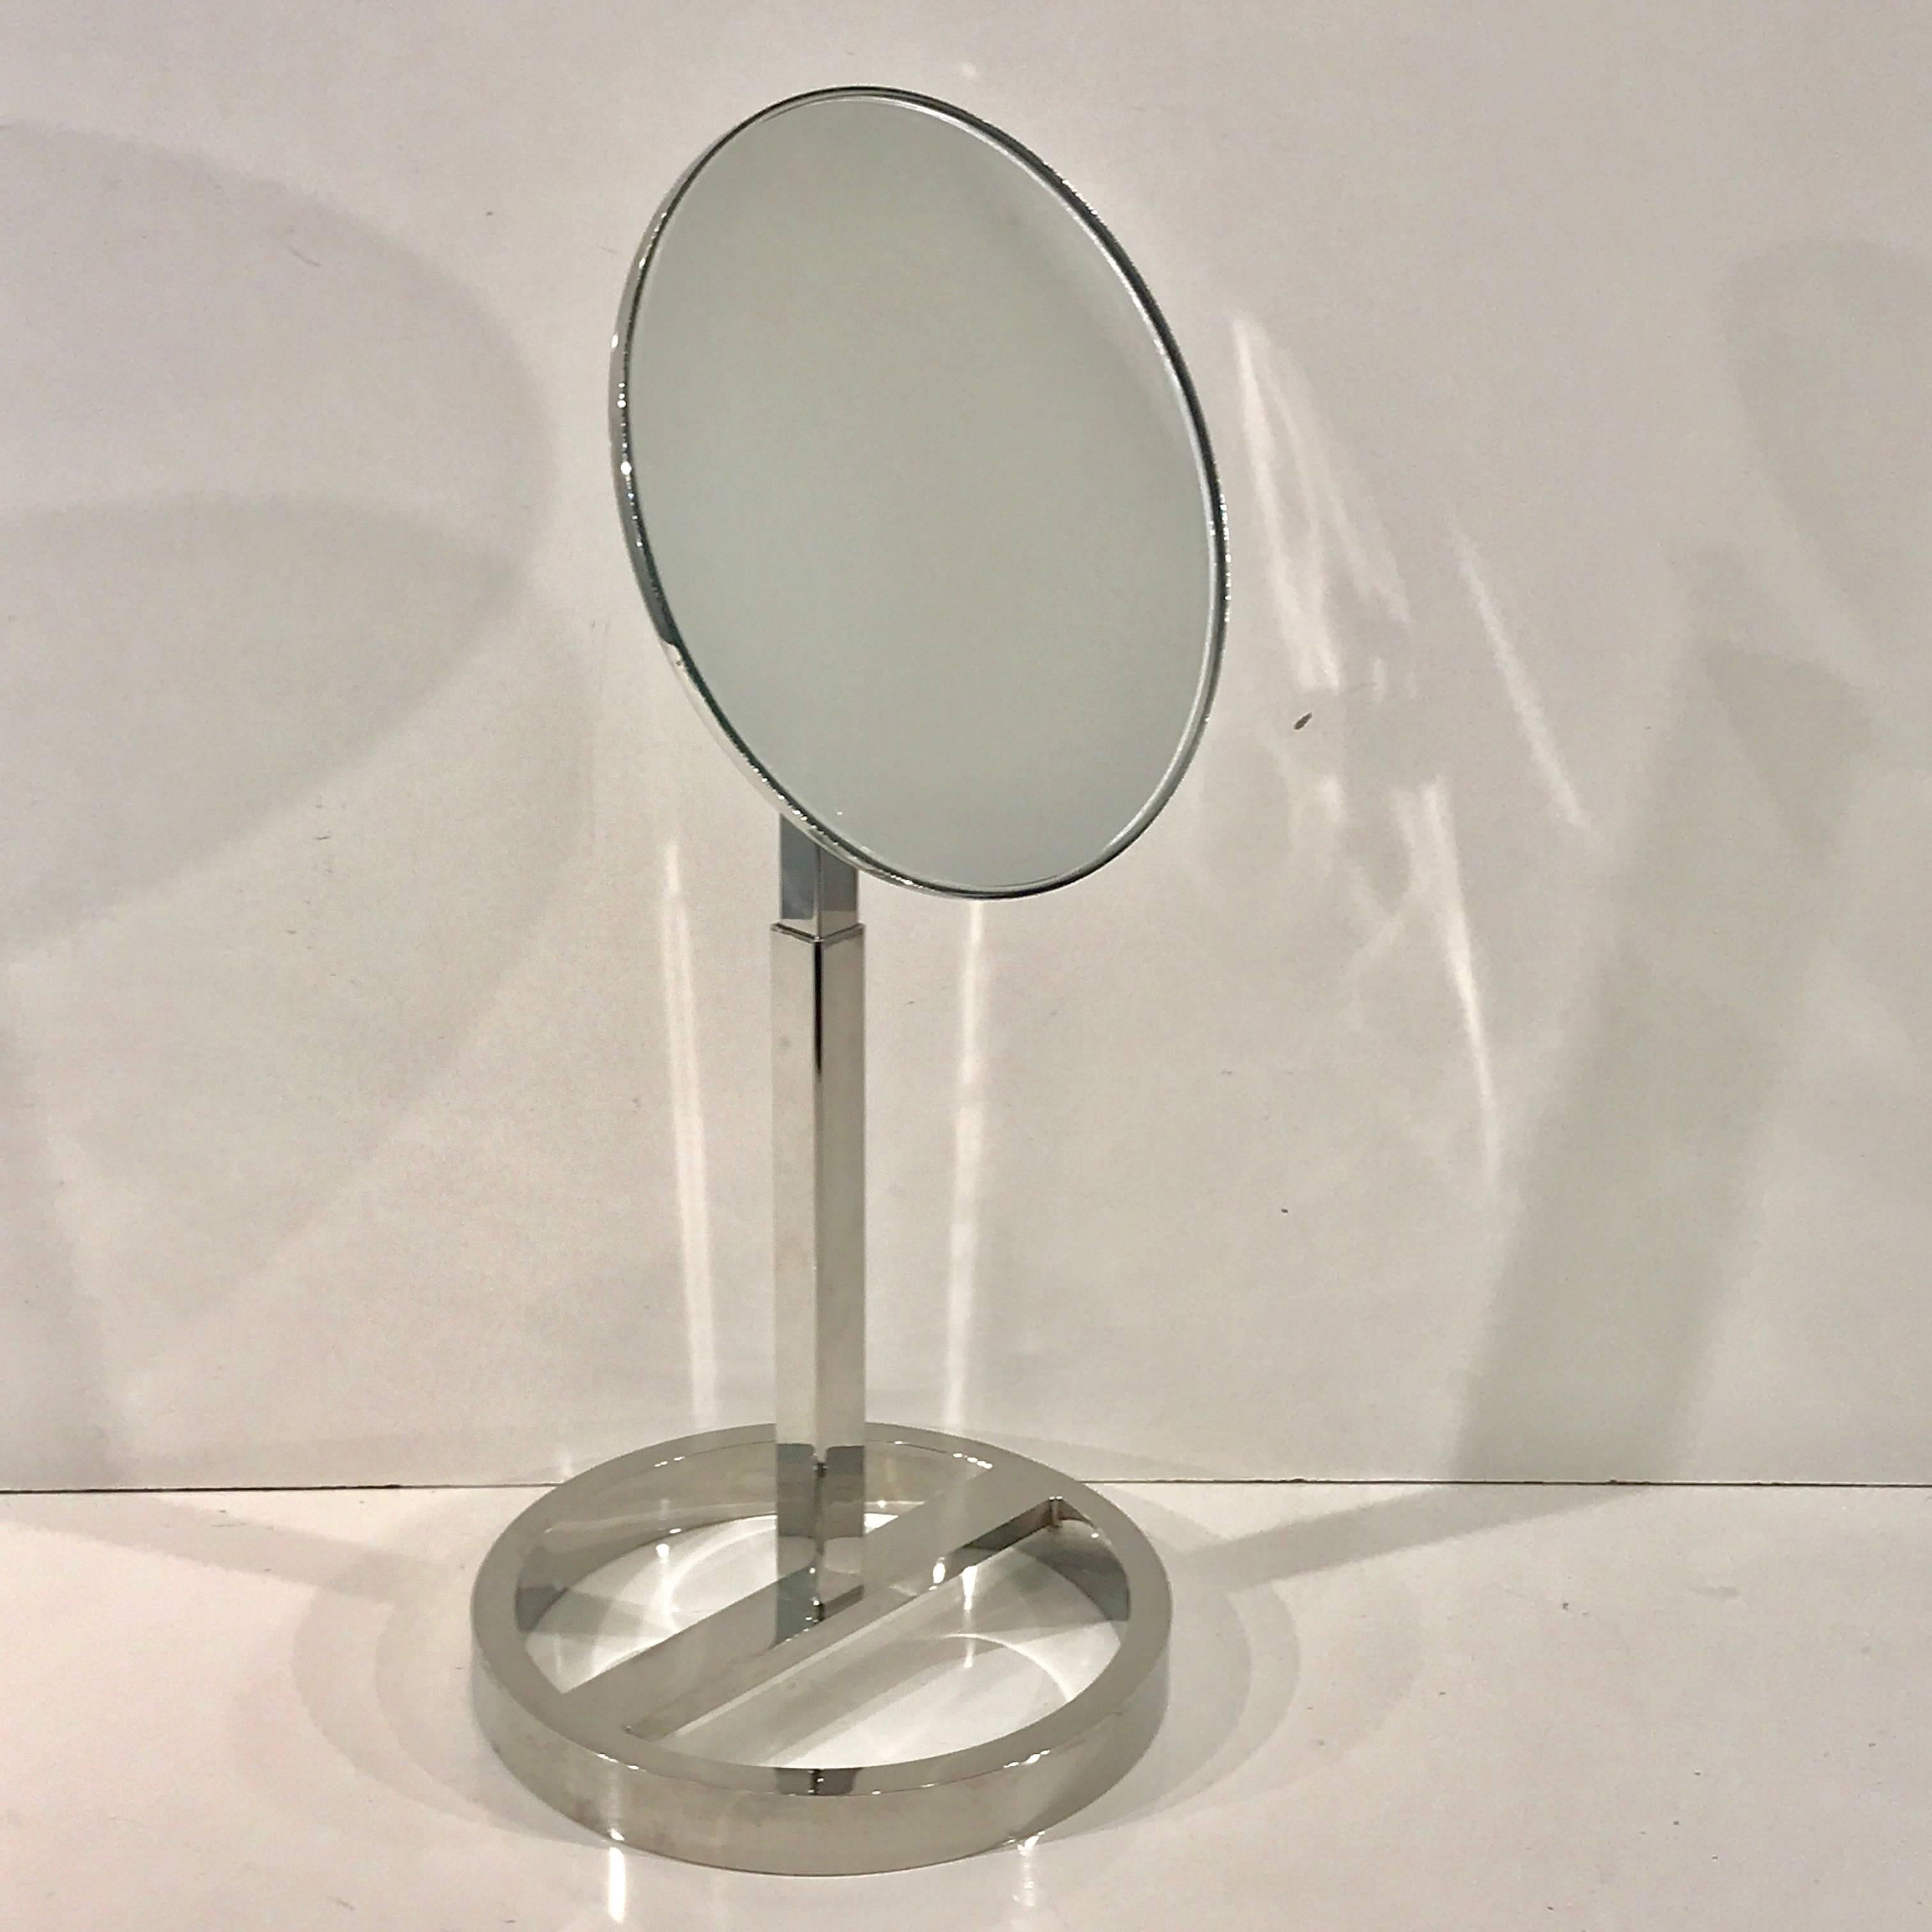 Midcentury chrome vanity mirror in the style of Milo Baughman, heavy duty, bright chrome frame, fully adjustable. Measure: The new 8-inch diameter mirror tilts backward and forward. The height is also adjustable to 16